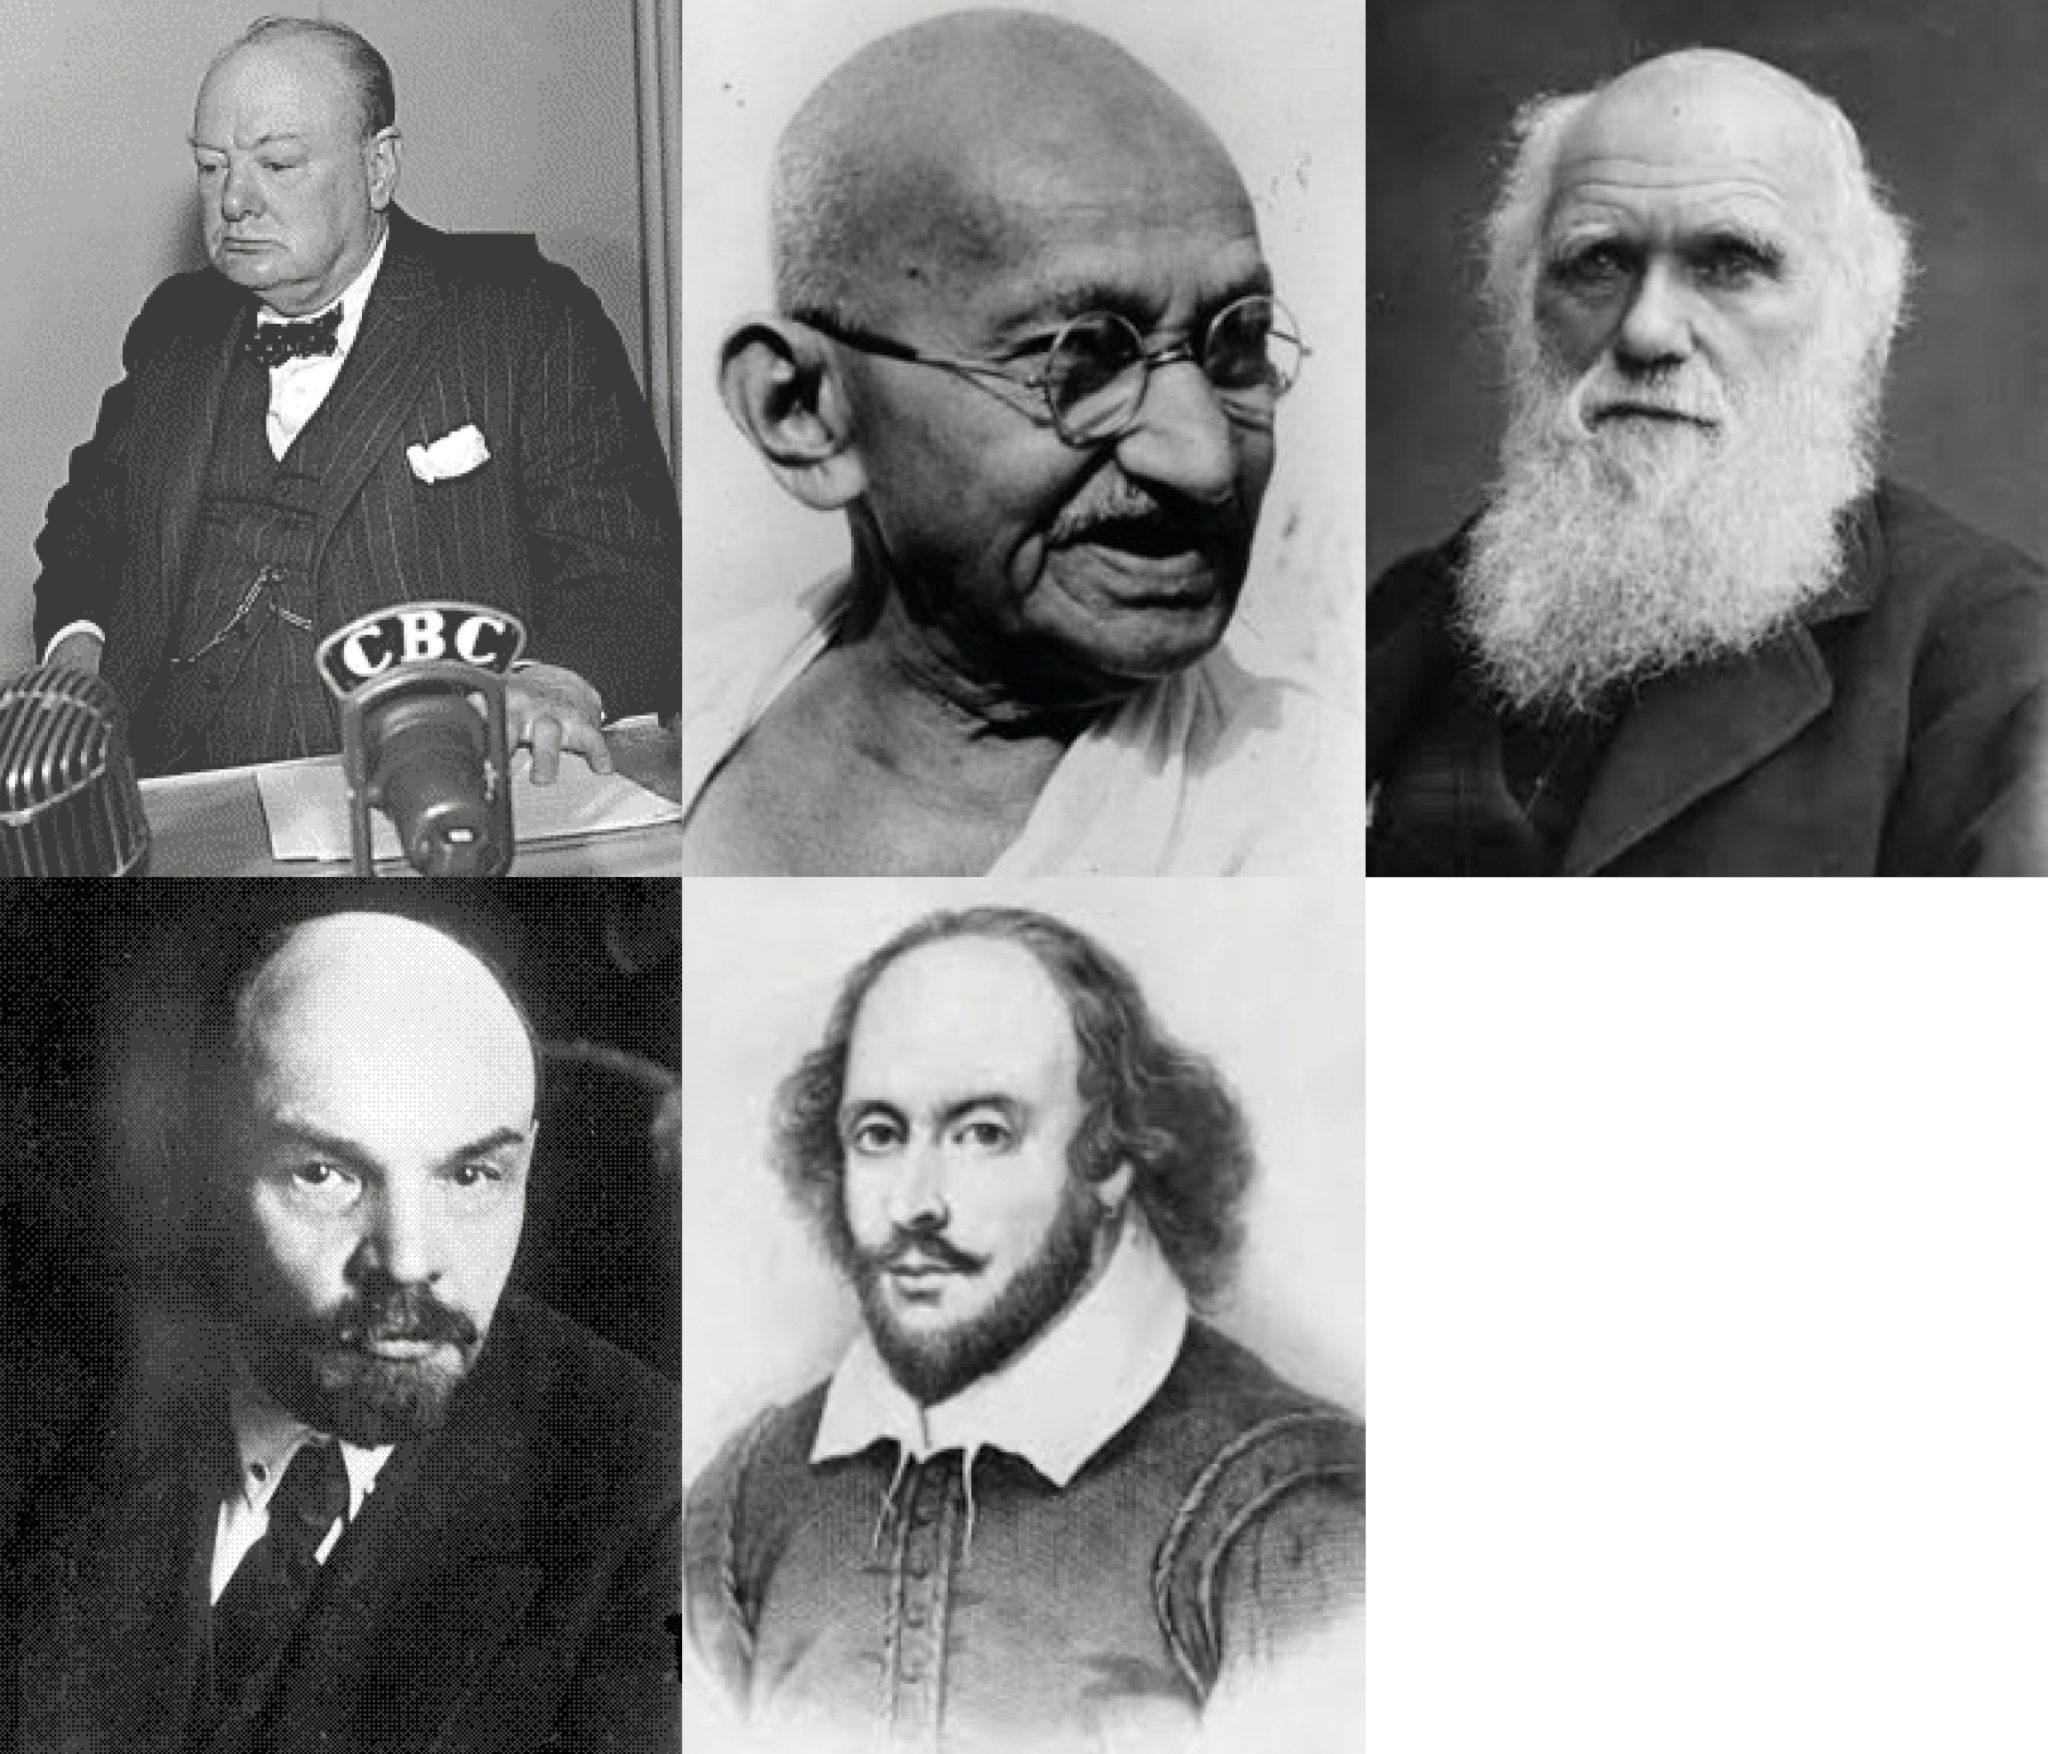 How the bald guys have shaped history